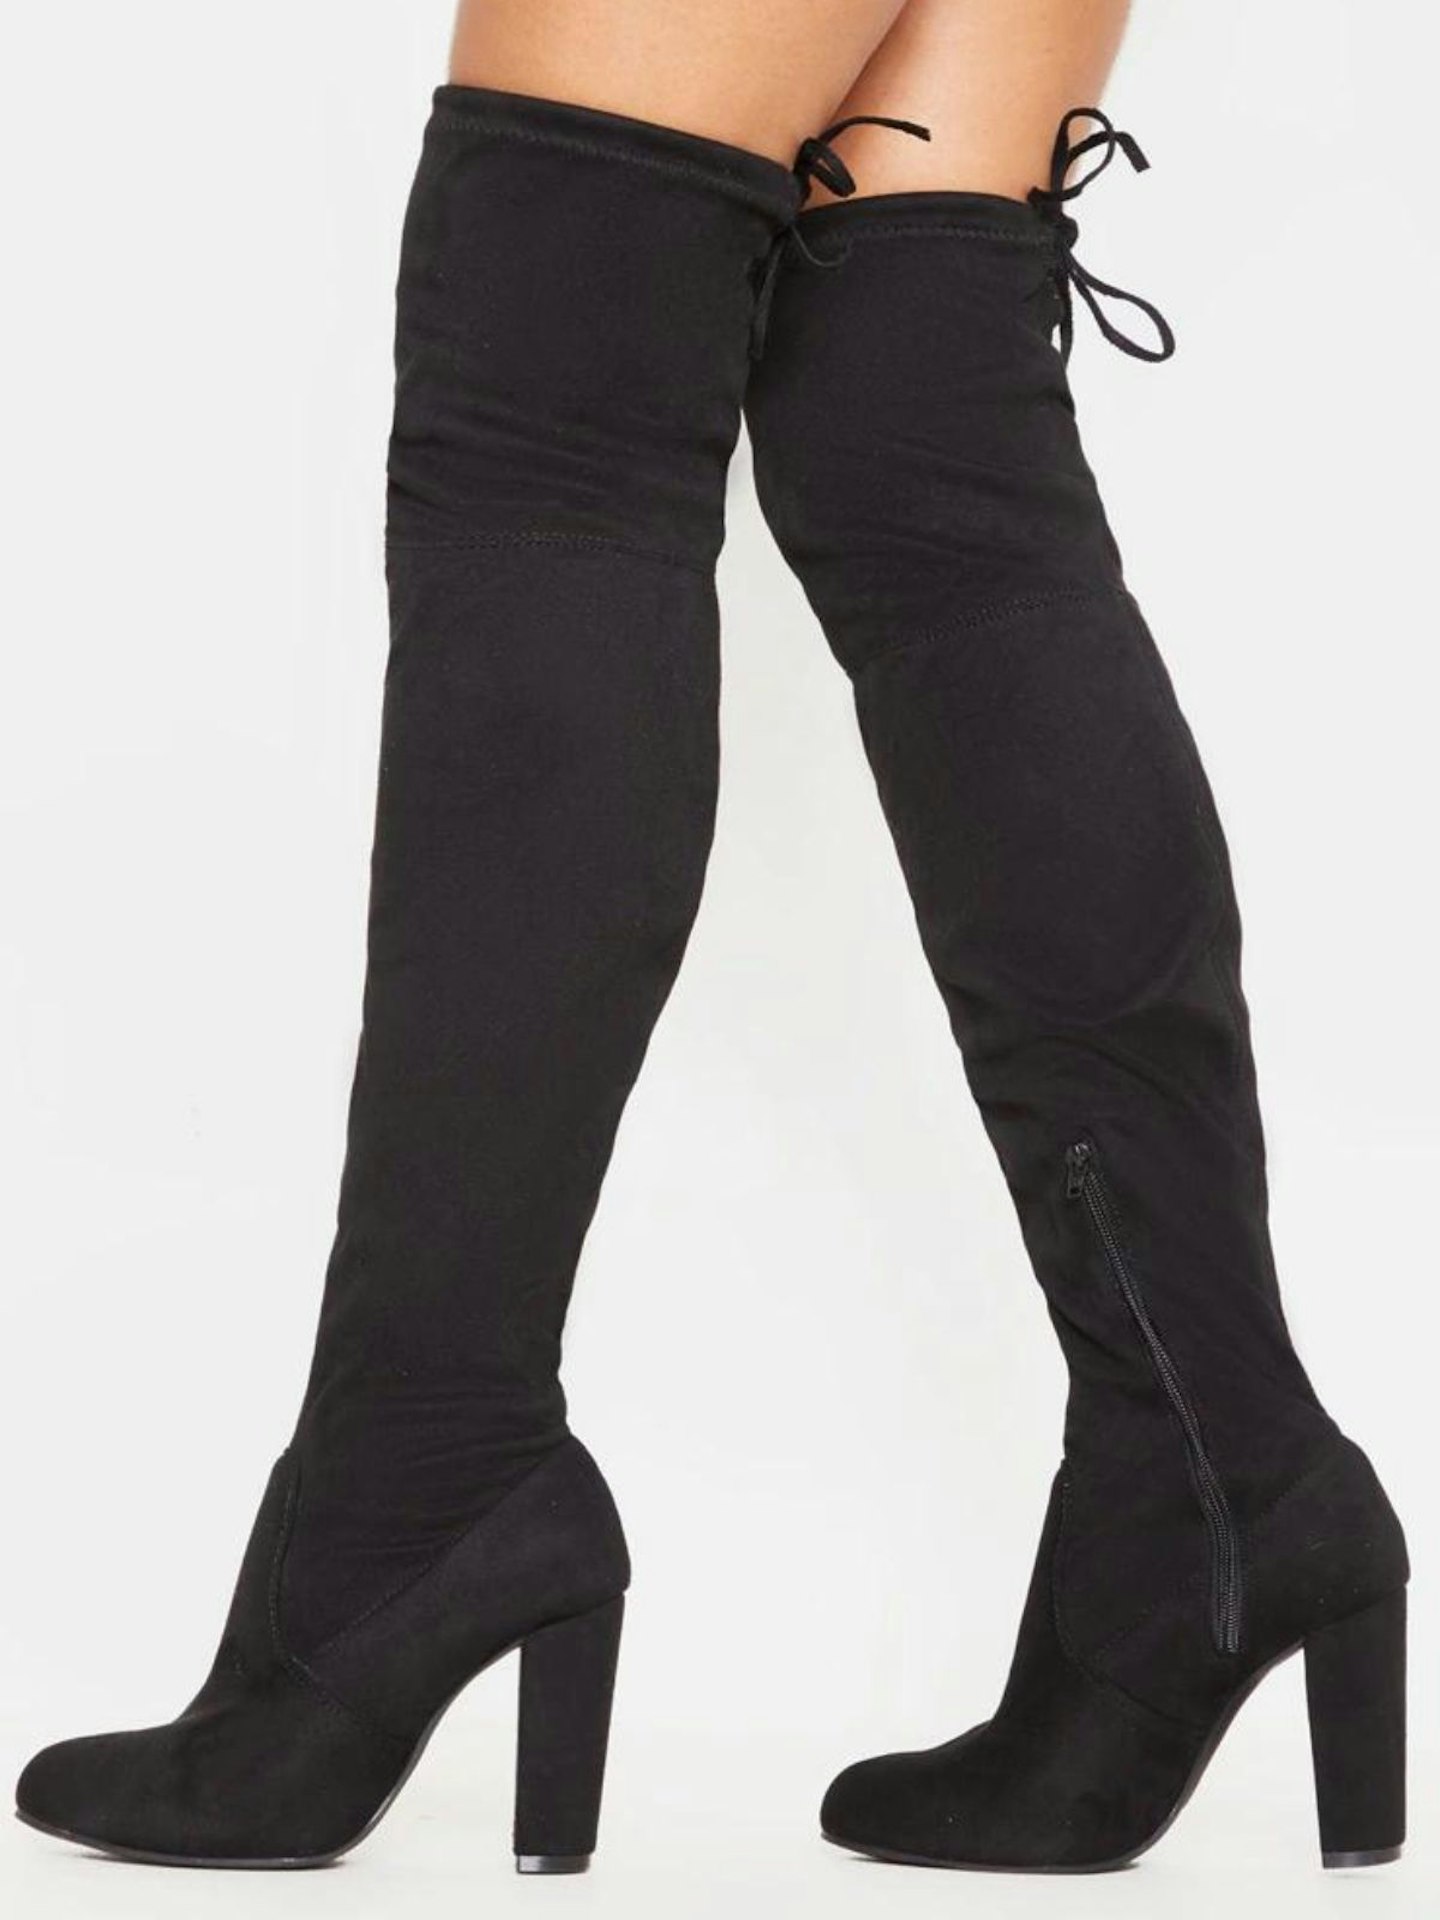 Bess Black Faux Suede Heel Thigh Boots